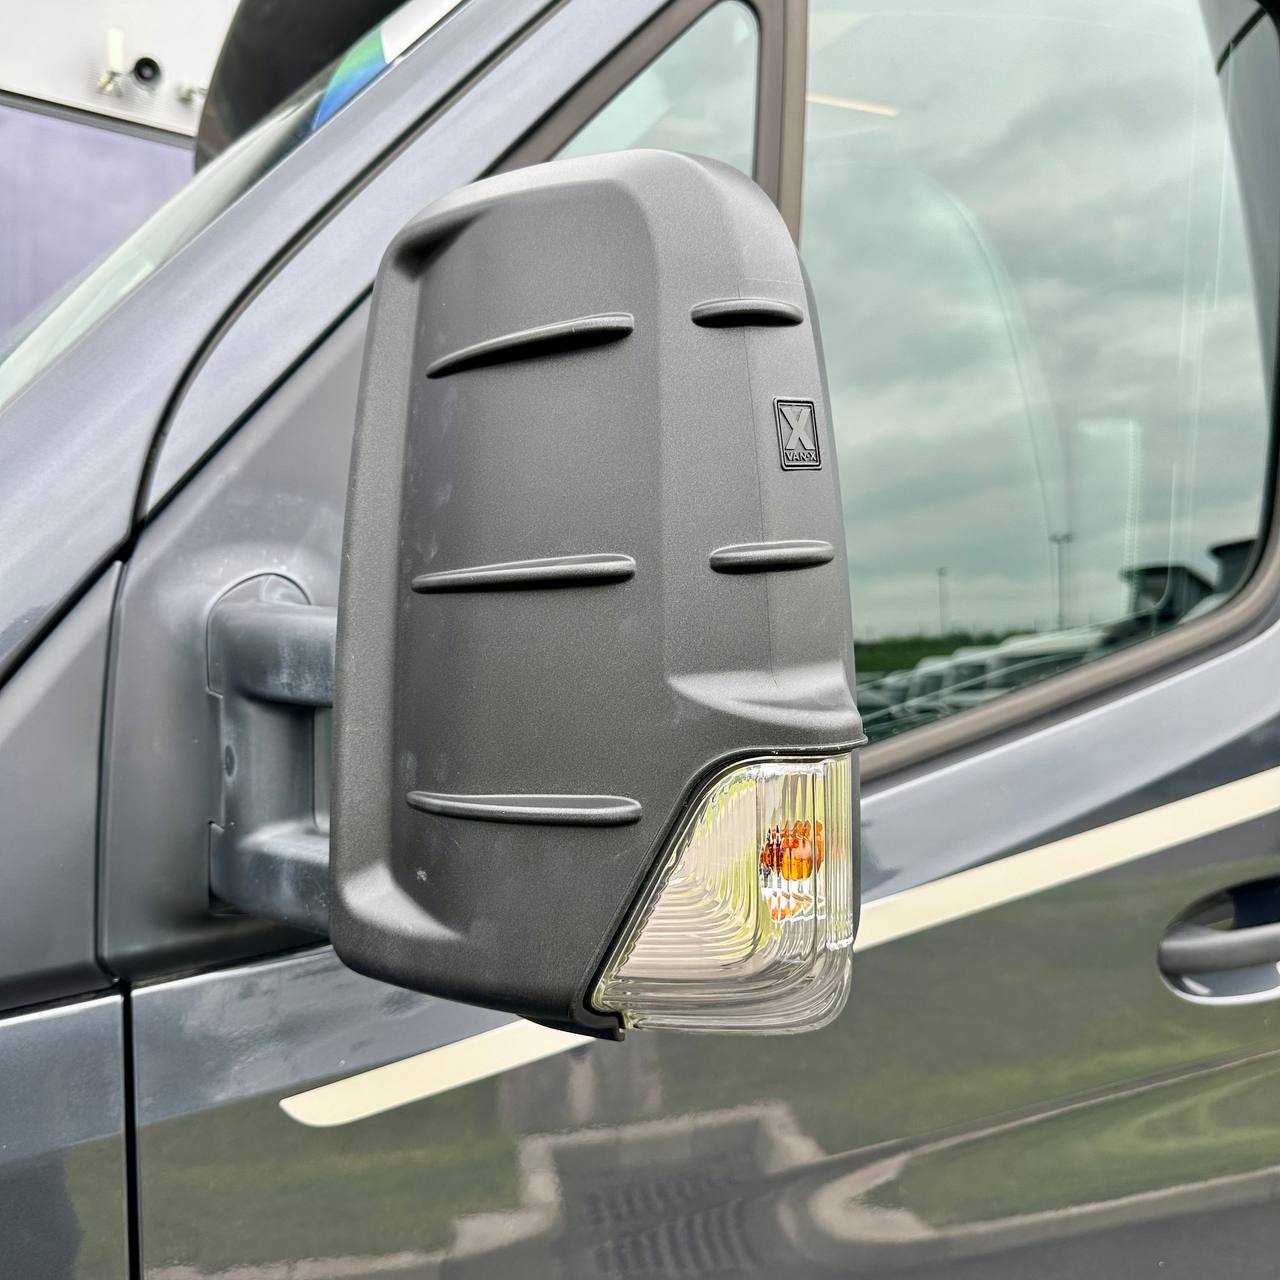 Mercedes Sprinter New Shape Wing Mirror Cap Covers - With Indicator (Set of 2) - Hammerite